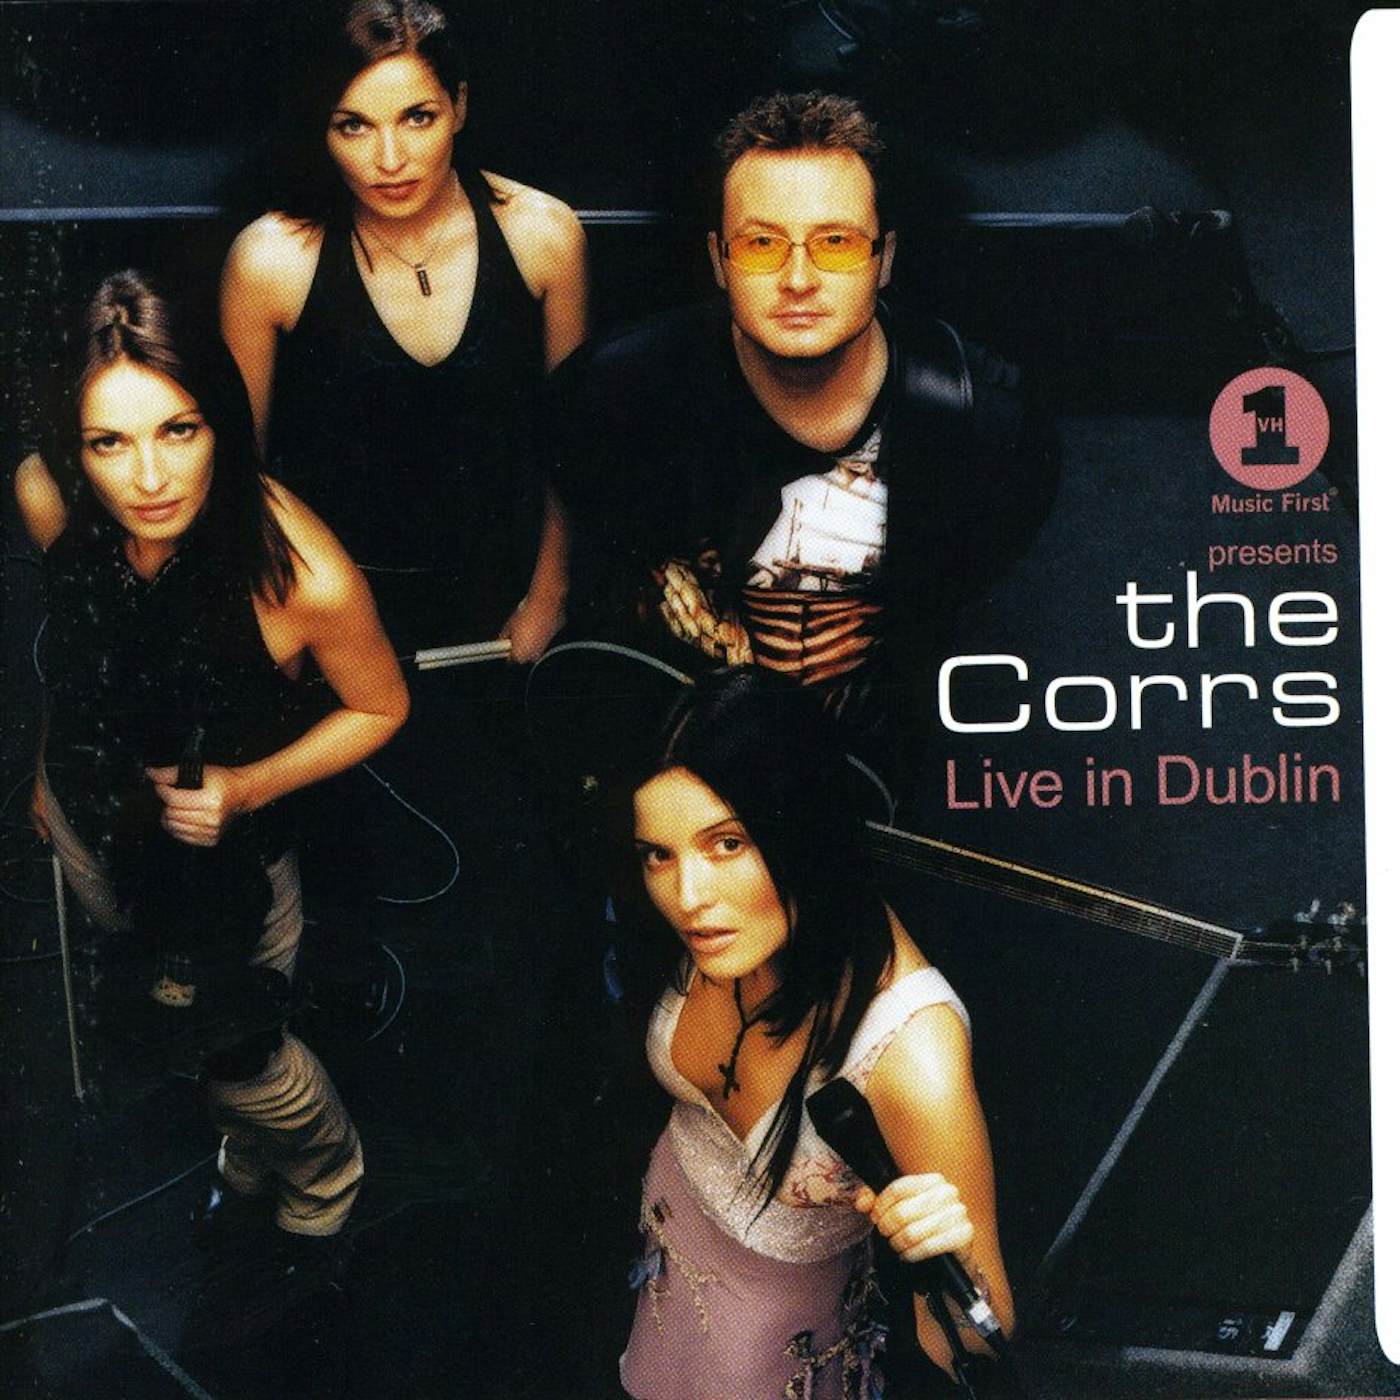 VH1 PRESENTS THE CORRS LIVE IN DUBLIN CD